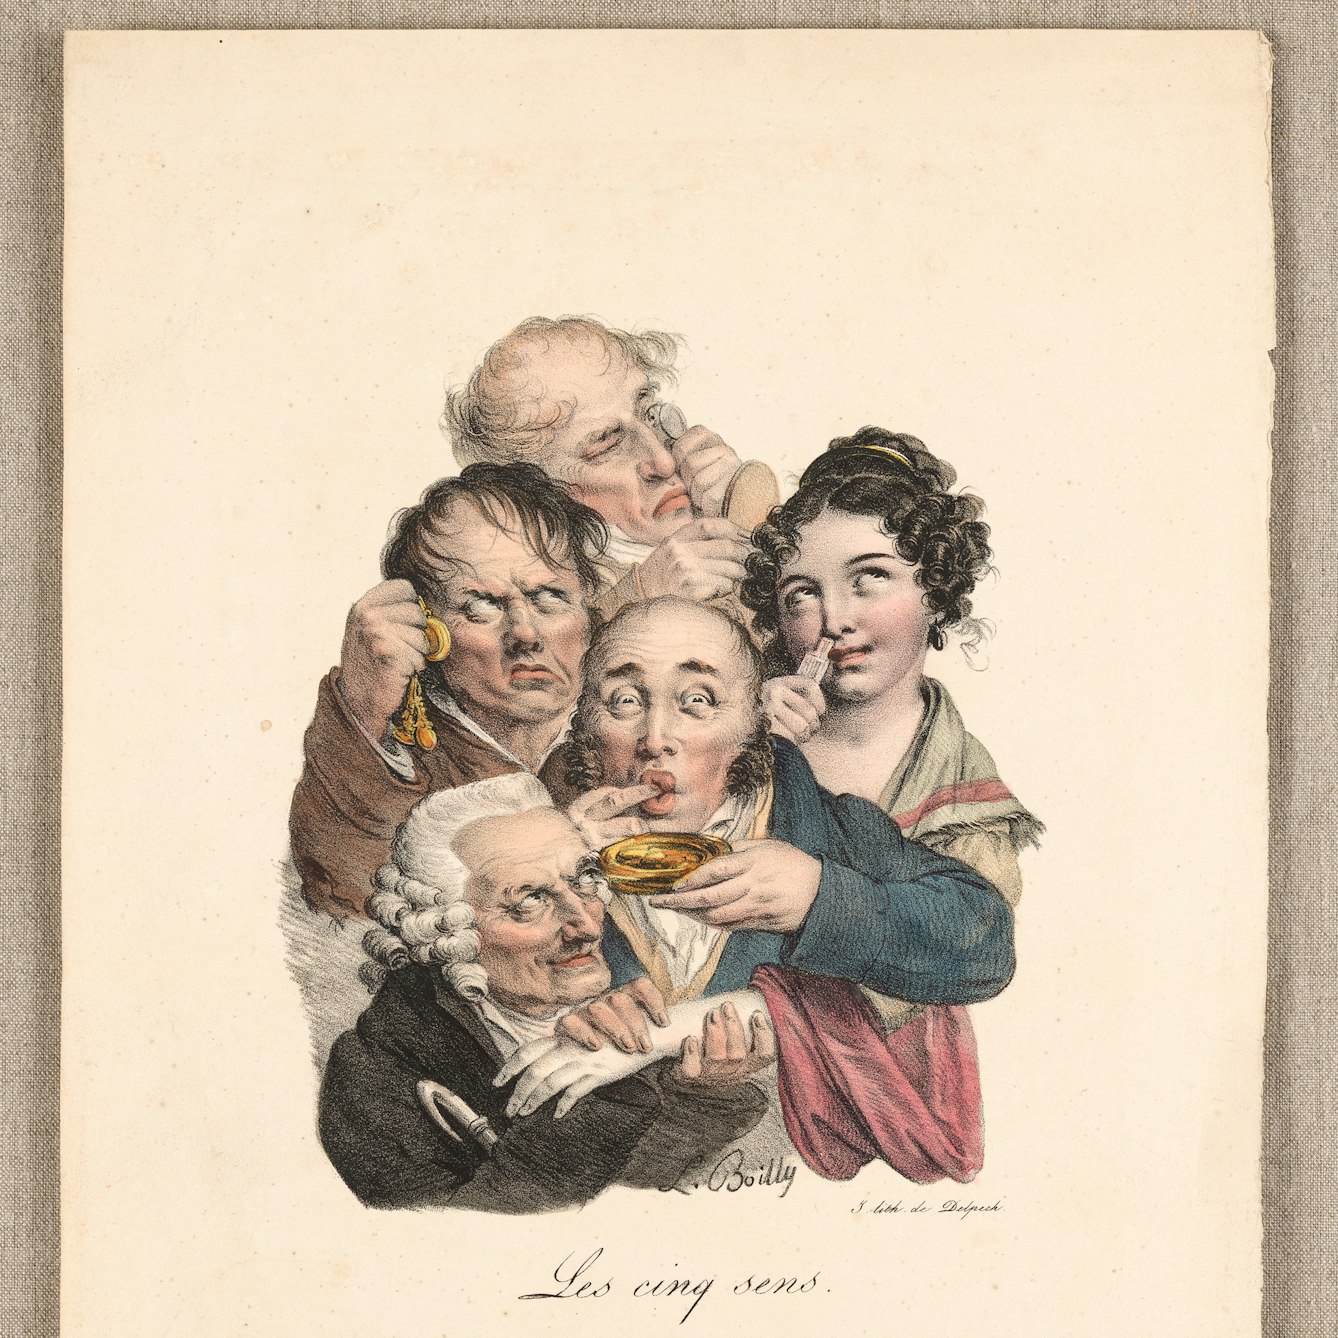 Image of four men and a woman experiencing making strange faces.